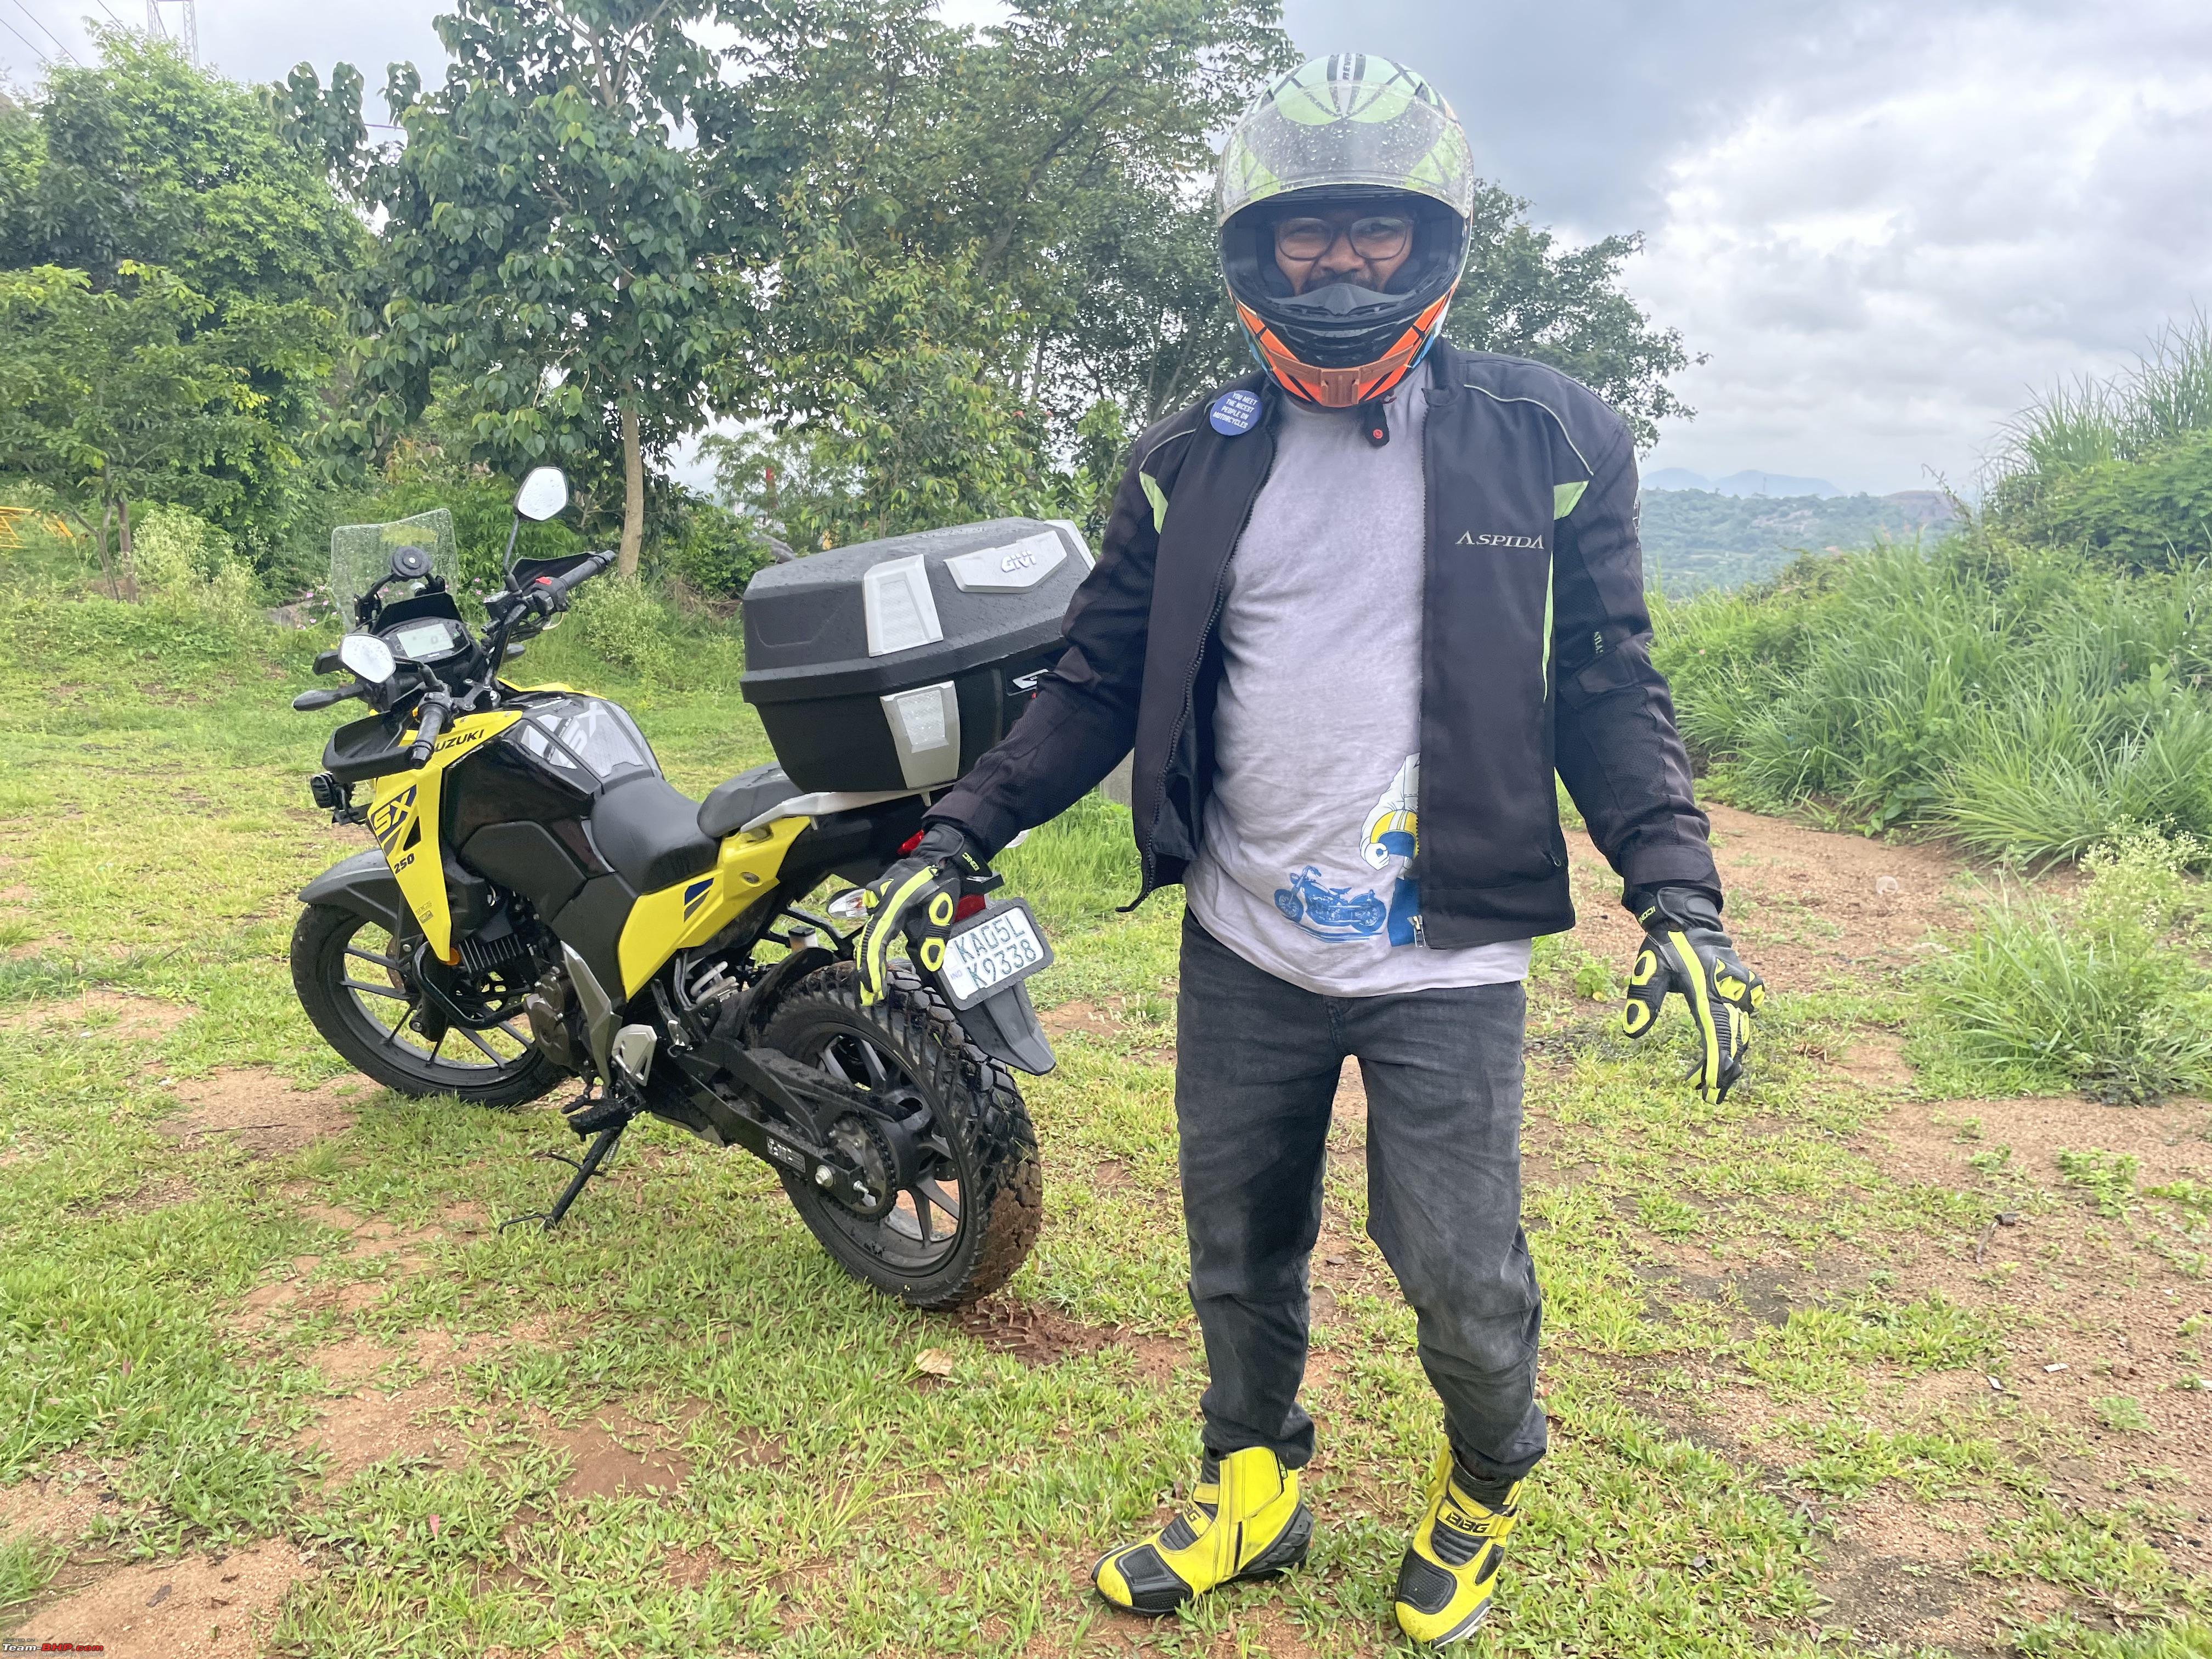 A STROM is brewing Yalla, my Suzuki V-Strom 250 SX ownership review